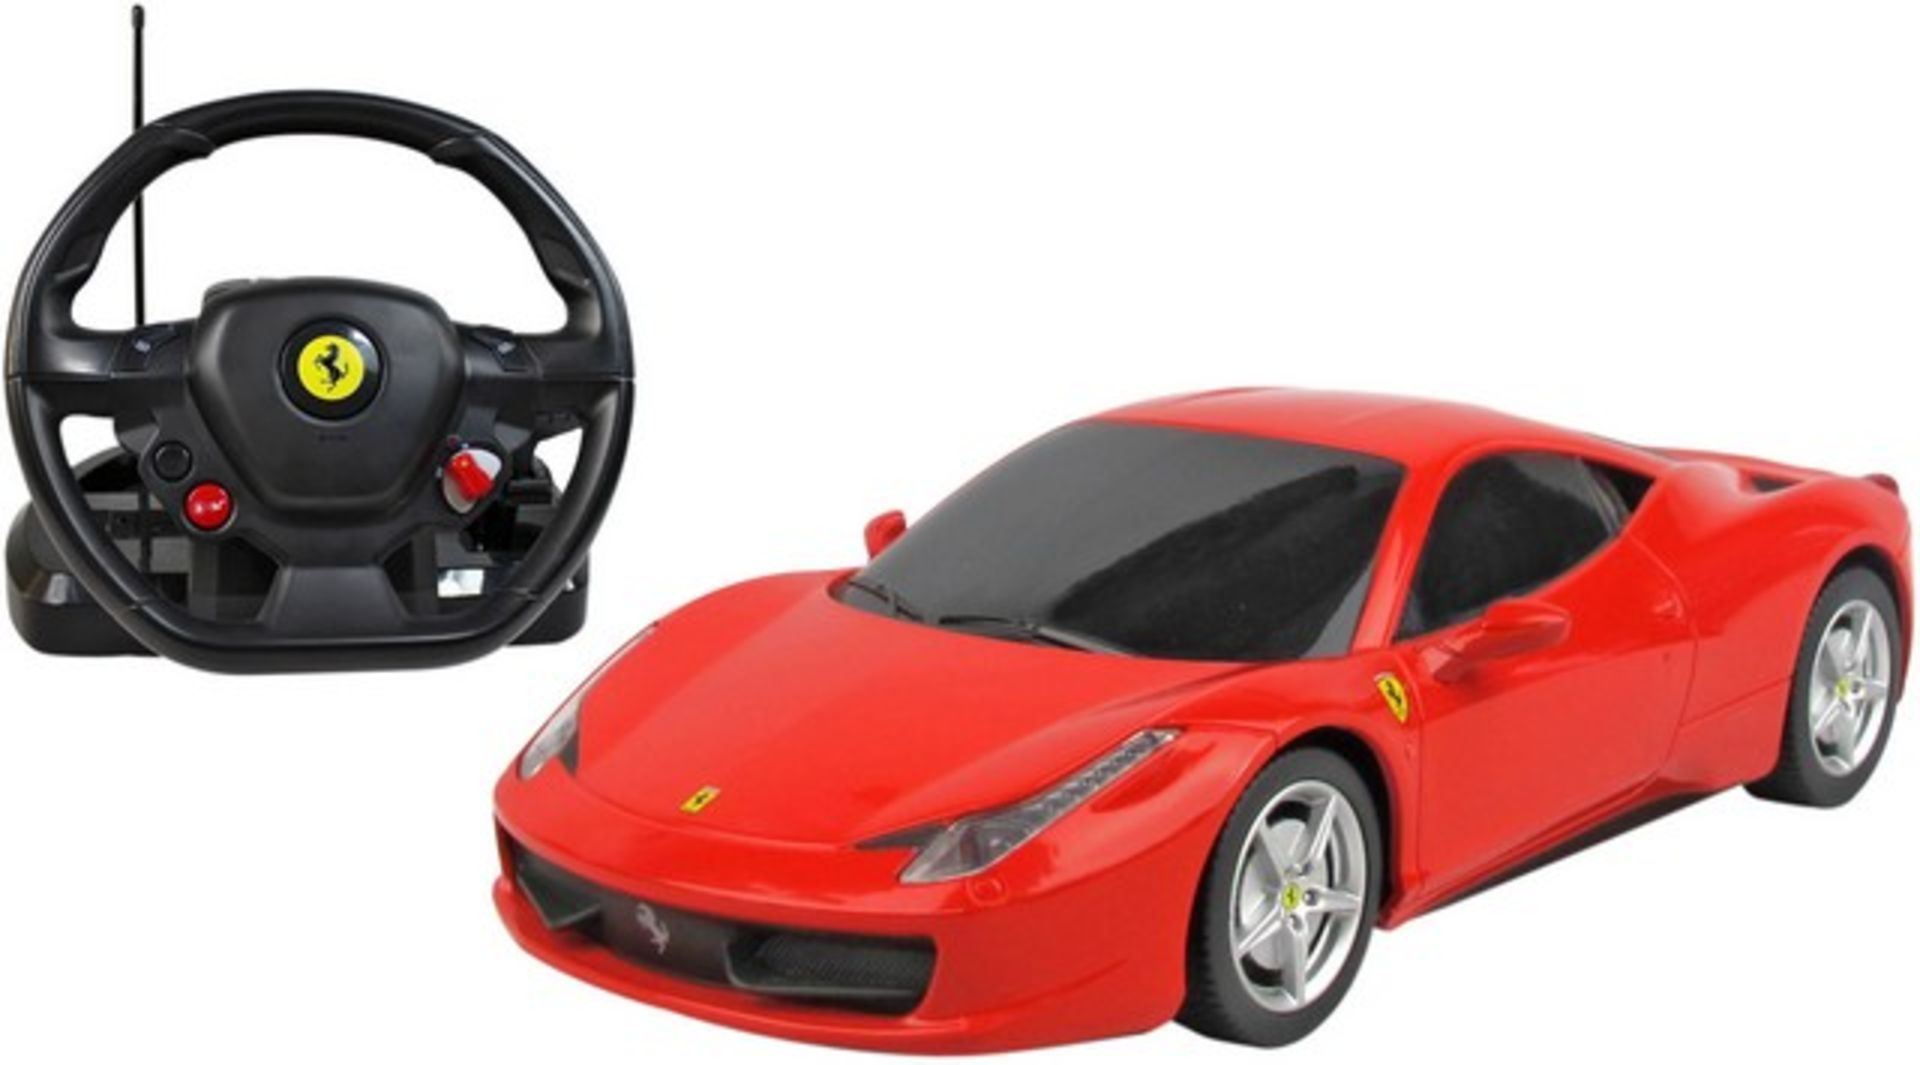 V Brand New 1/18 RC Ferrari 458 Italia With Sound and Steering Wheel Controller - Official - Image 2 of 2